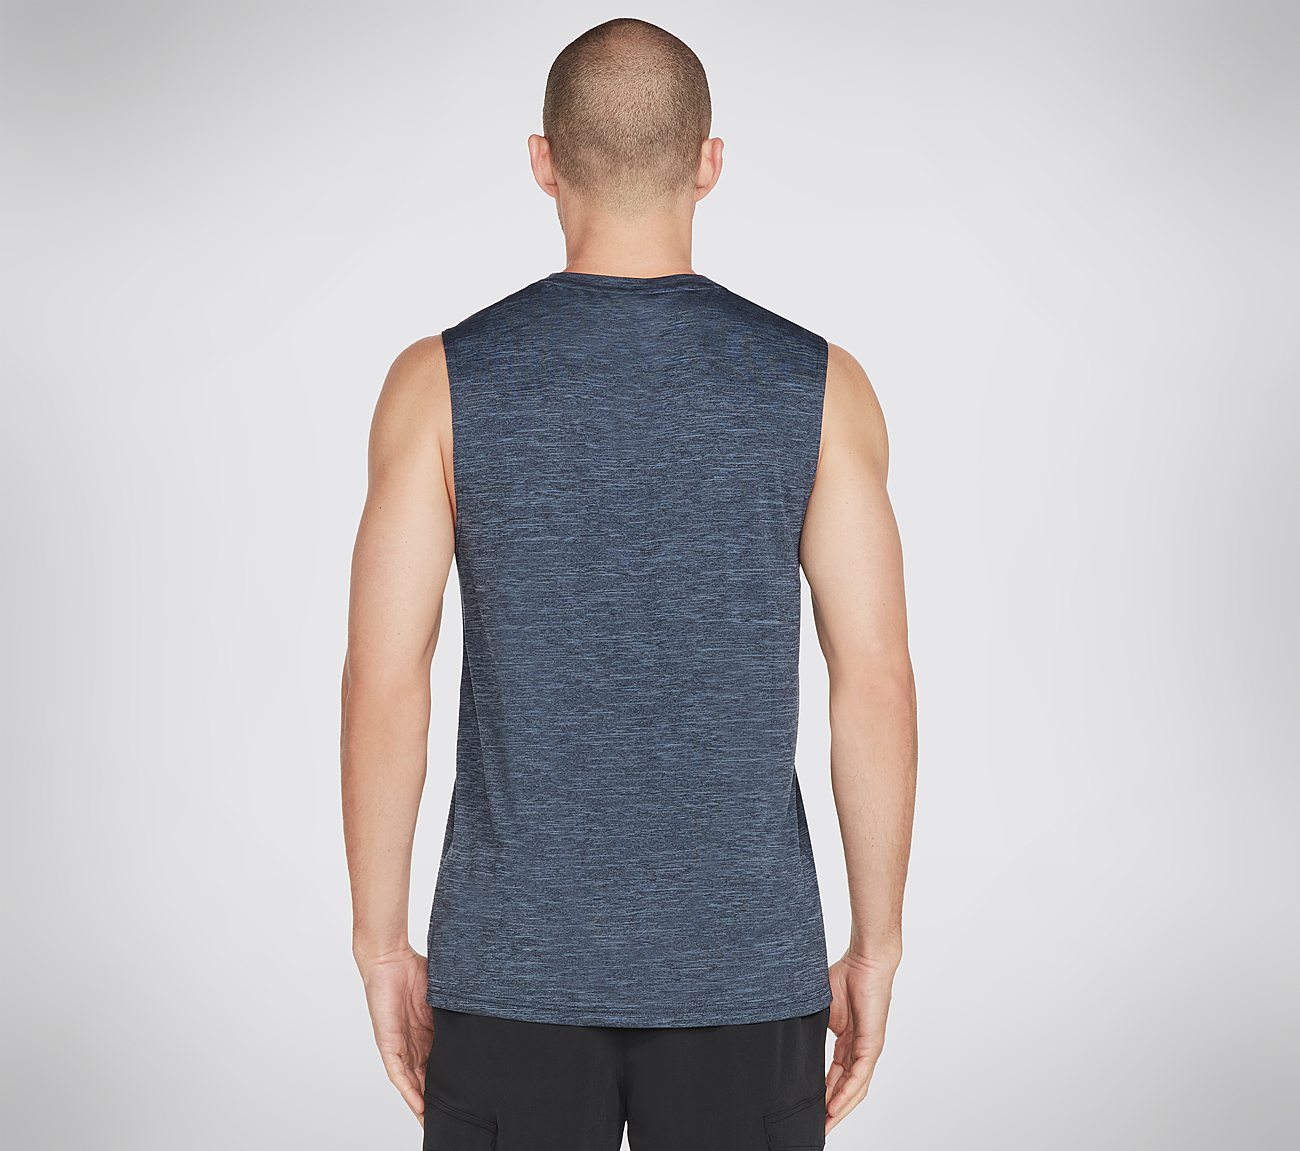 ON THE ROAD MUSCLE TANK, BLUE/GREY Apparel Top View